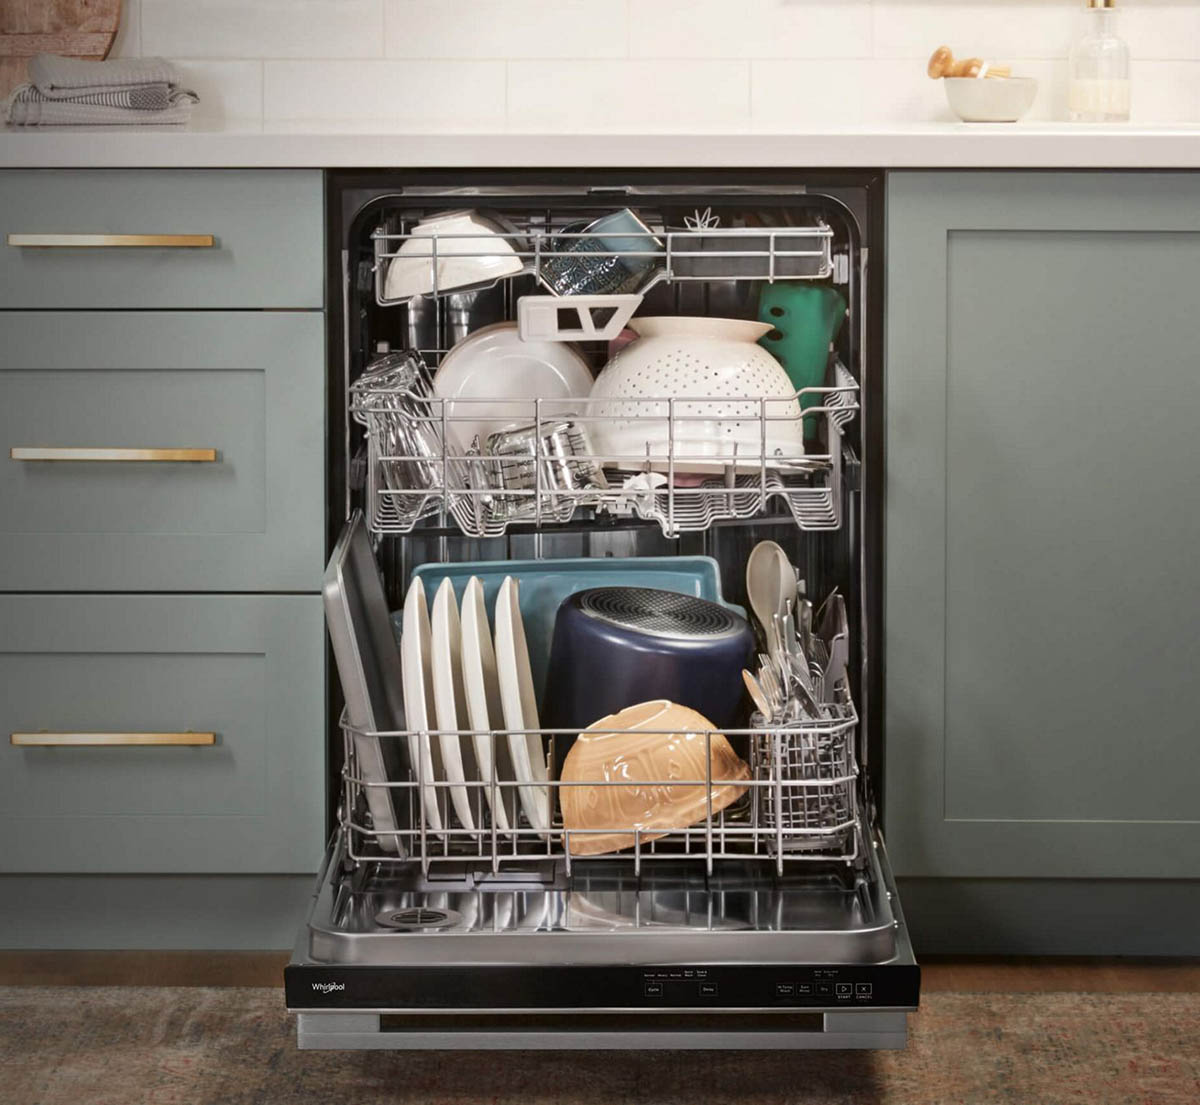 How To Fix The Error Code 45201 For Whirlpool Dishwasher